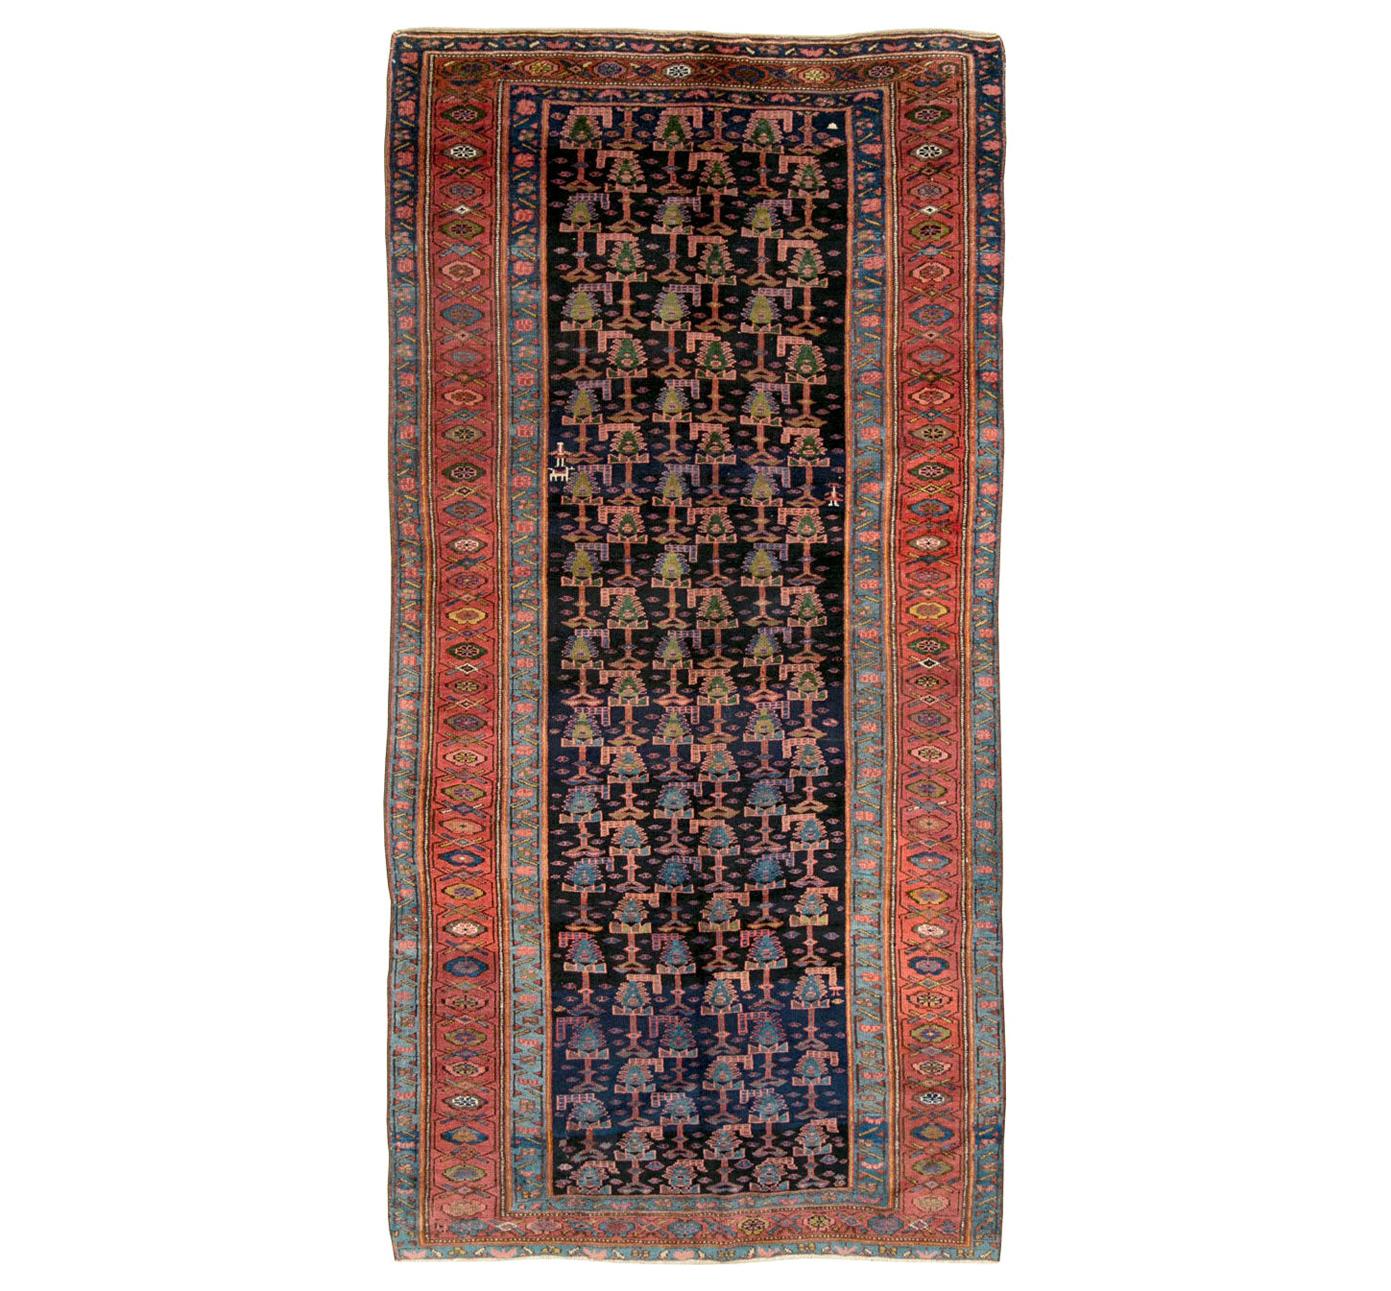 Early 20th Century Handmade Persian Tribal Gallery Accent Rug in Jewel Tones